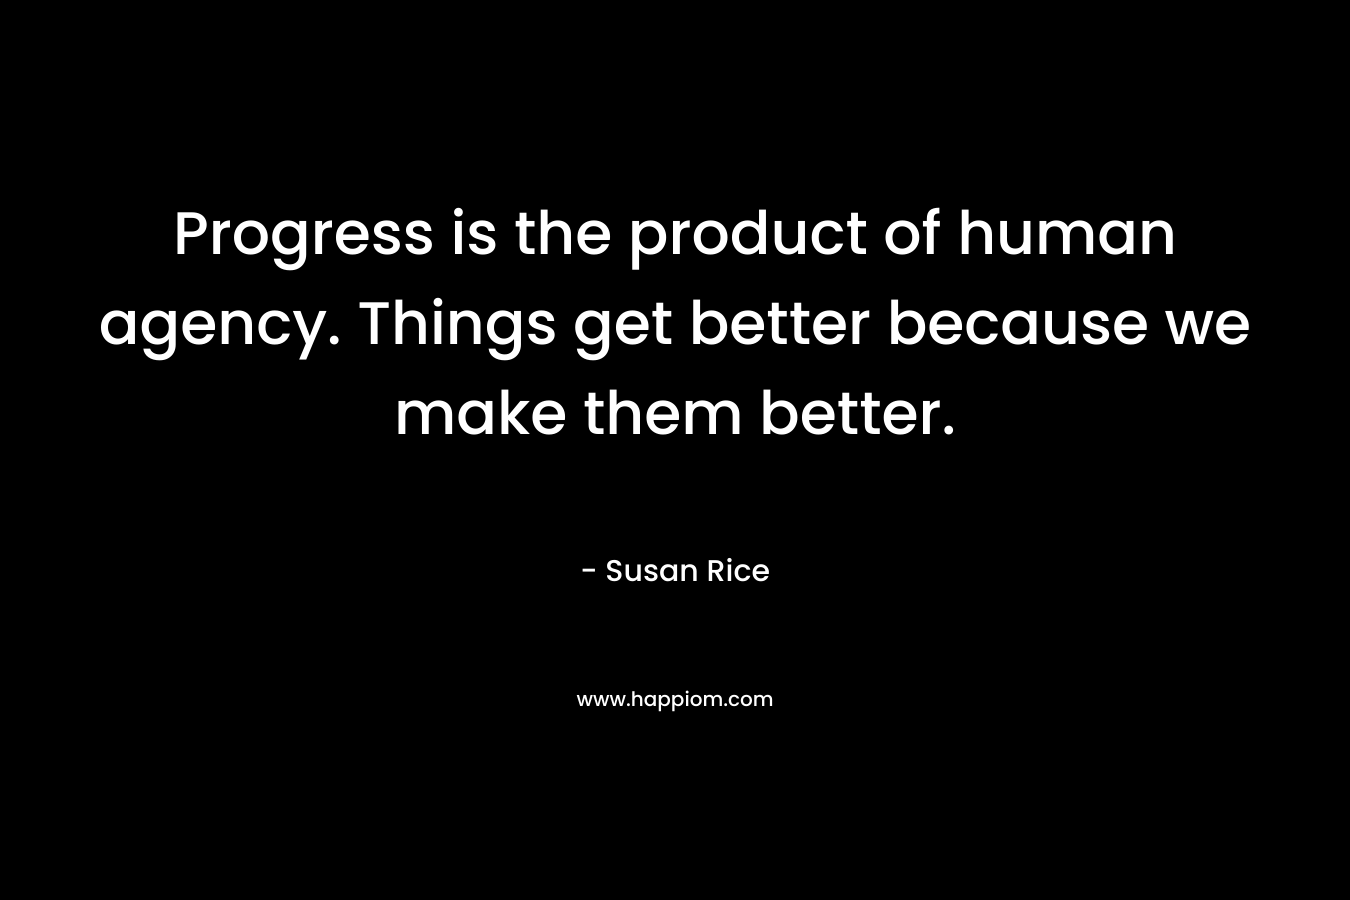 Progress is the product of human agency. Things get better because we make them better. – Susan Rice